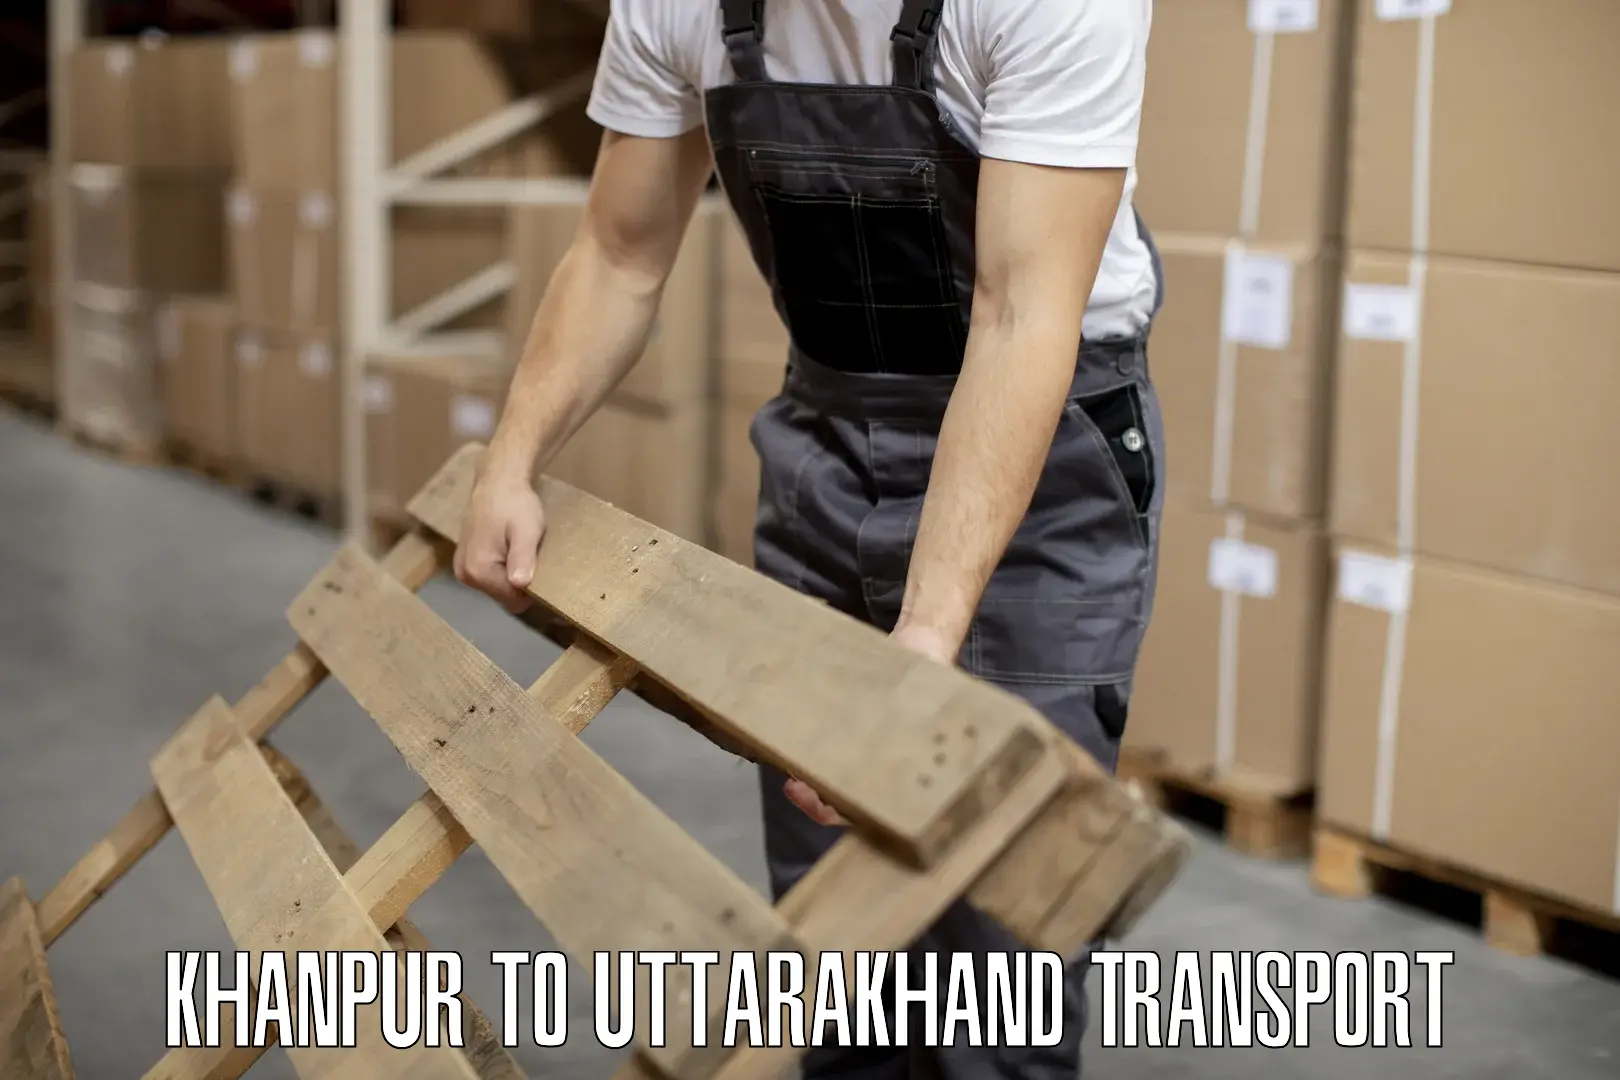 Truck transport companies in India Khanpur to Roorkee